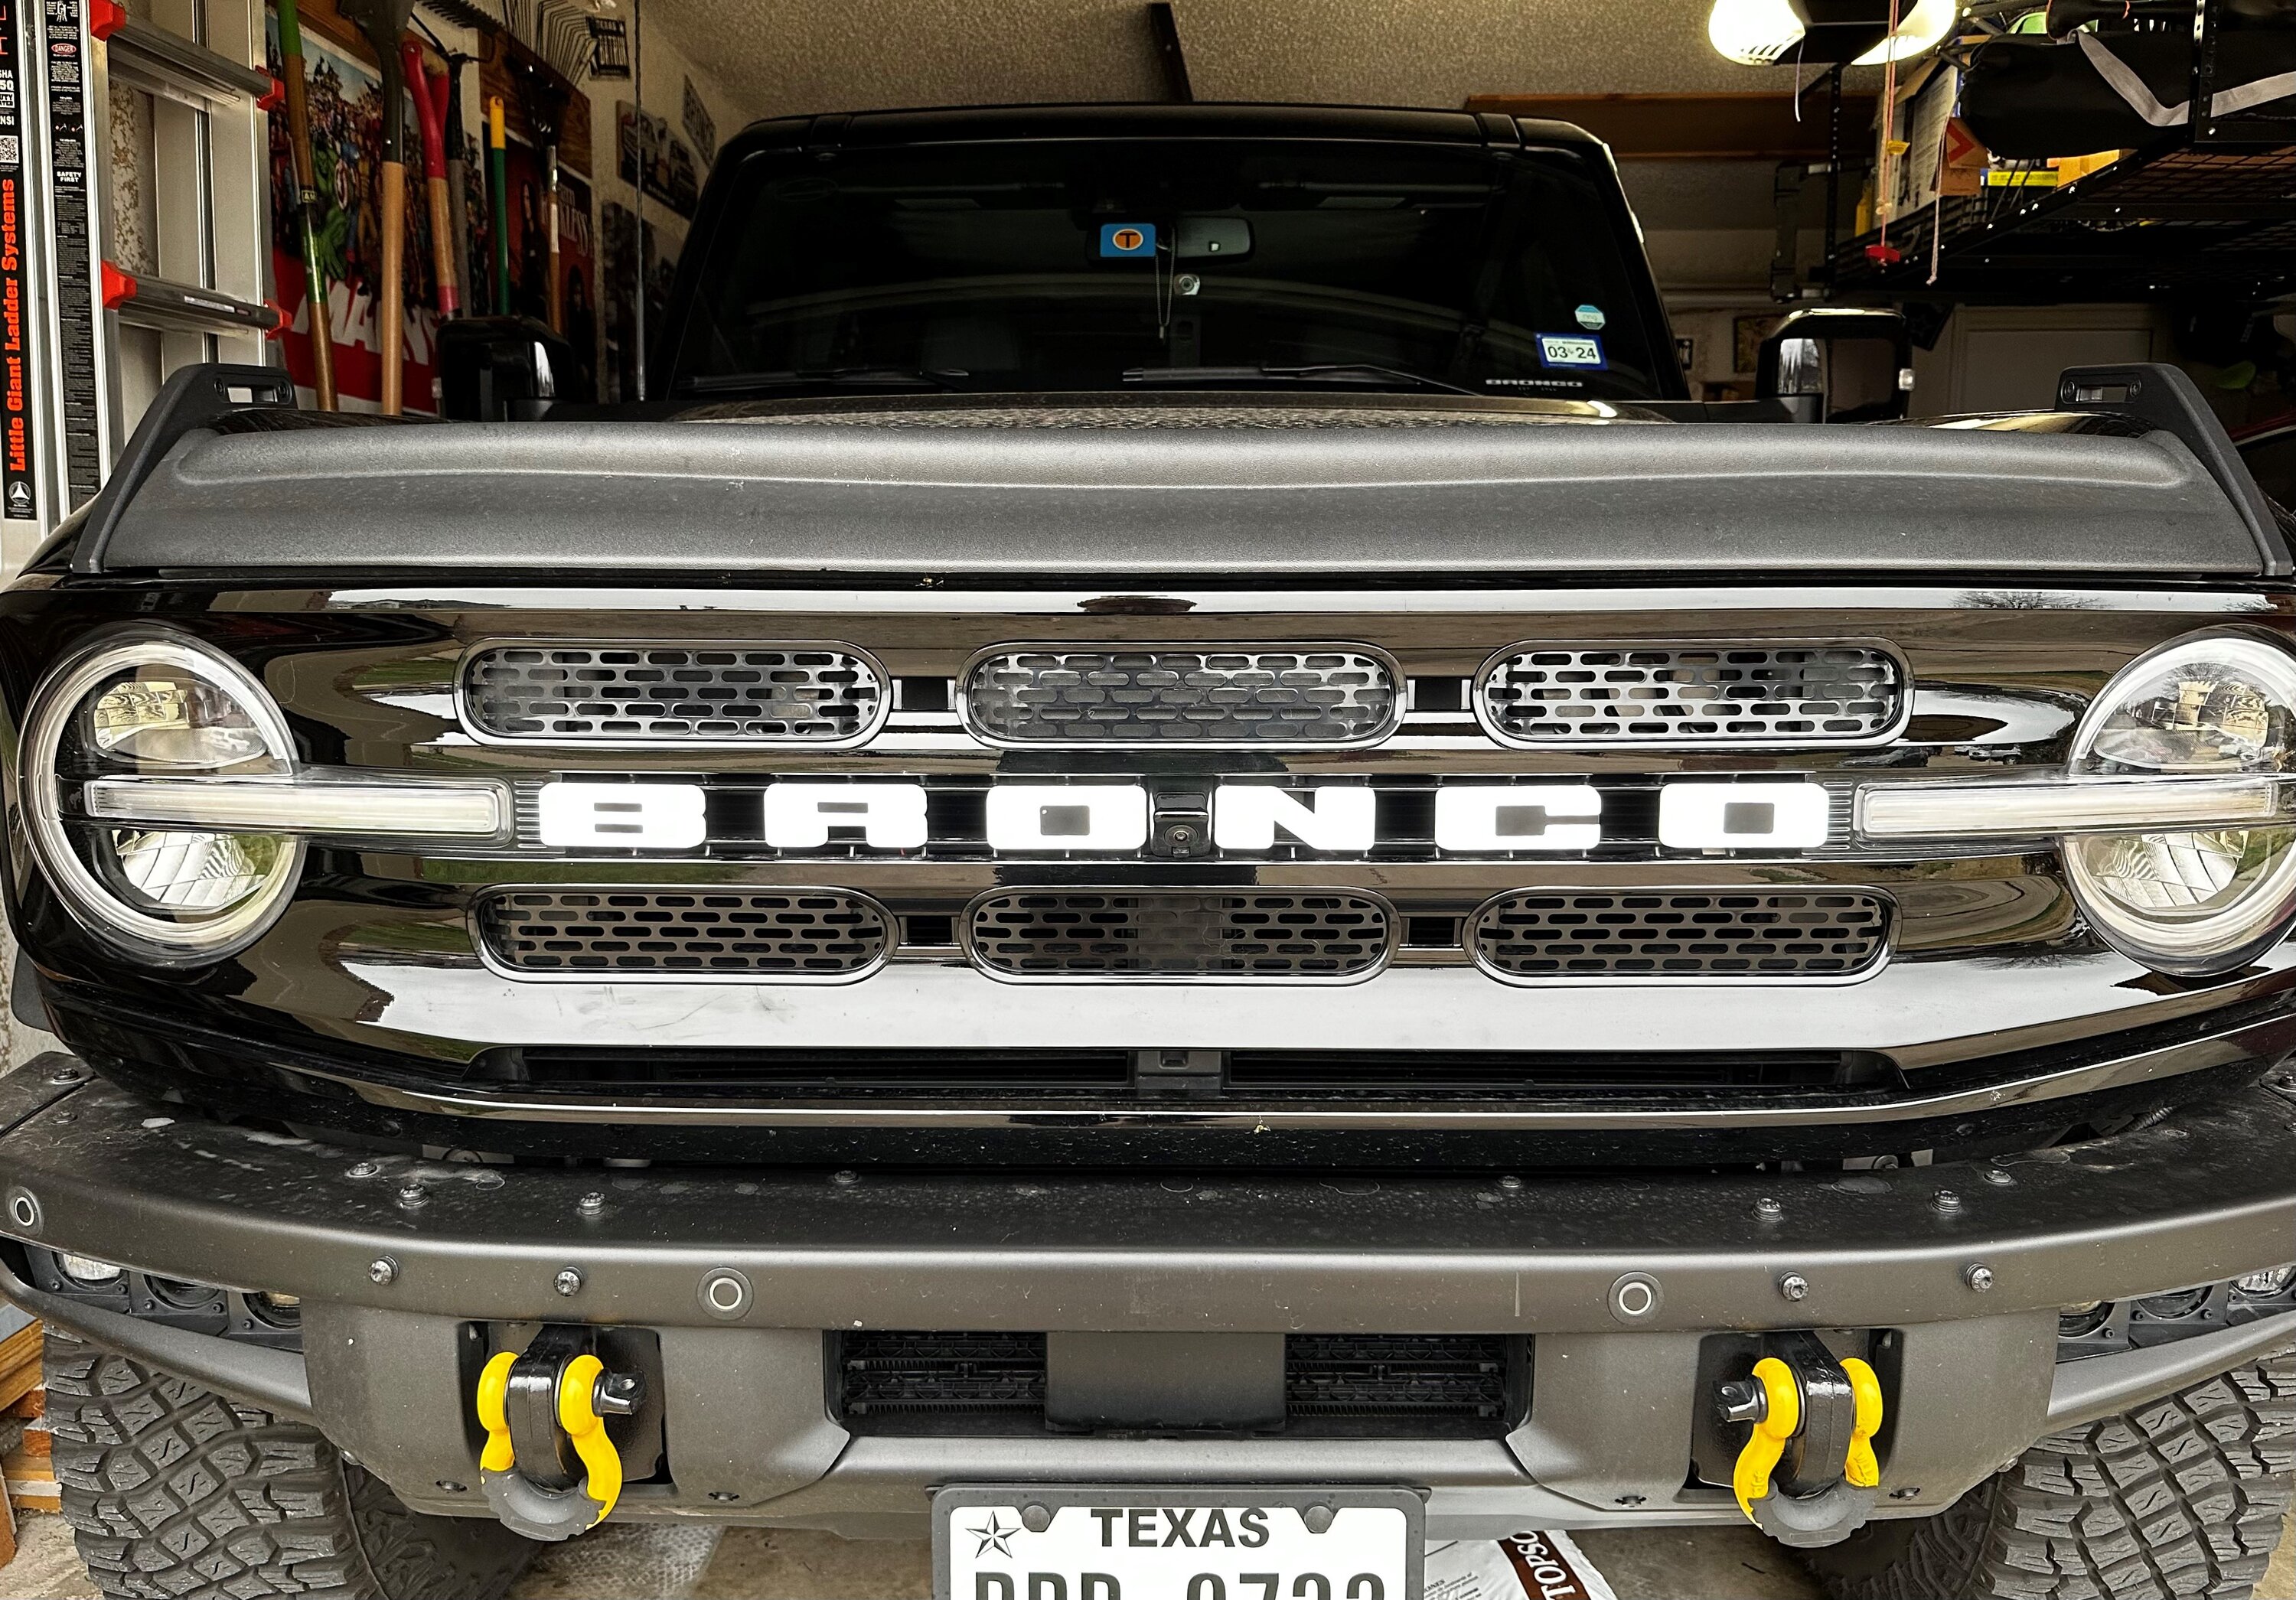 Ford Bronco Mesh grill inserts installed on Big Bend grill inserts